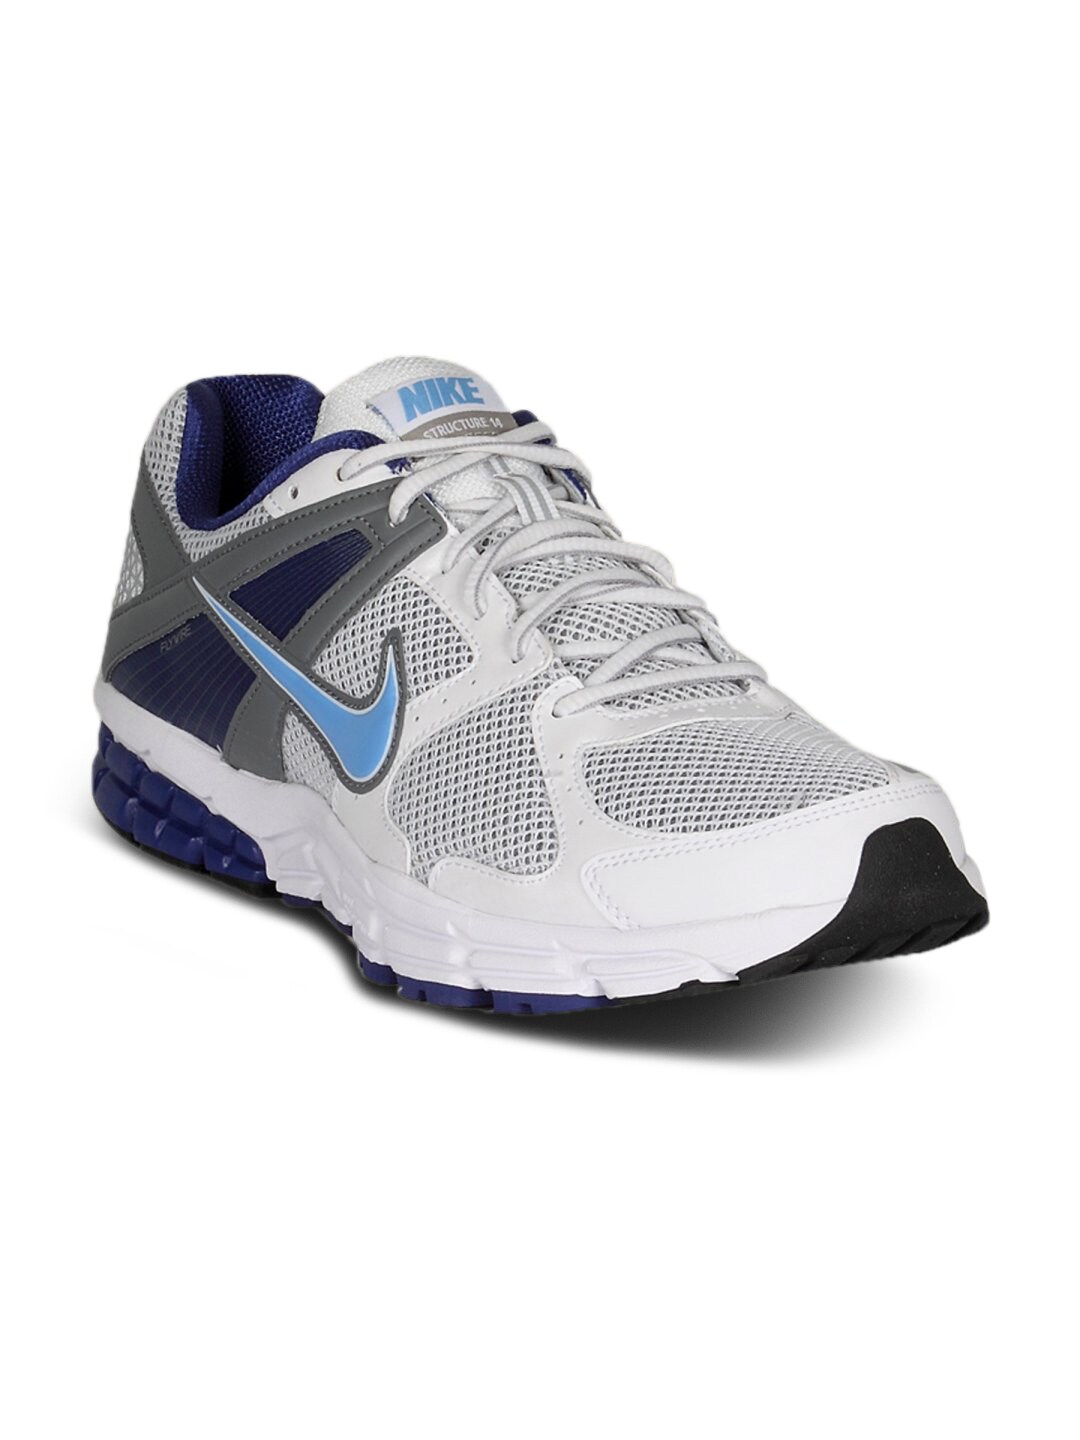 Nike Men's Zoom Structure White Shoe